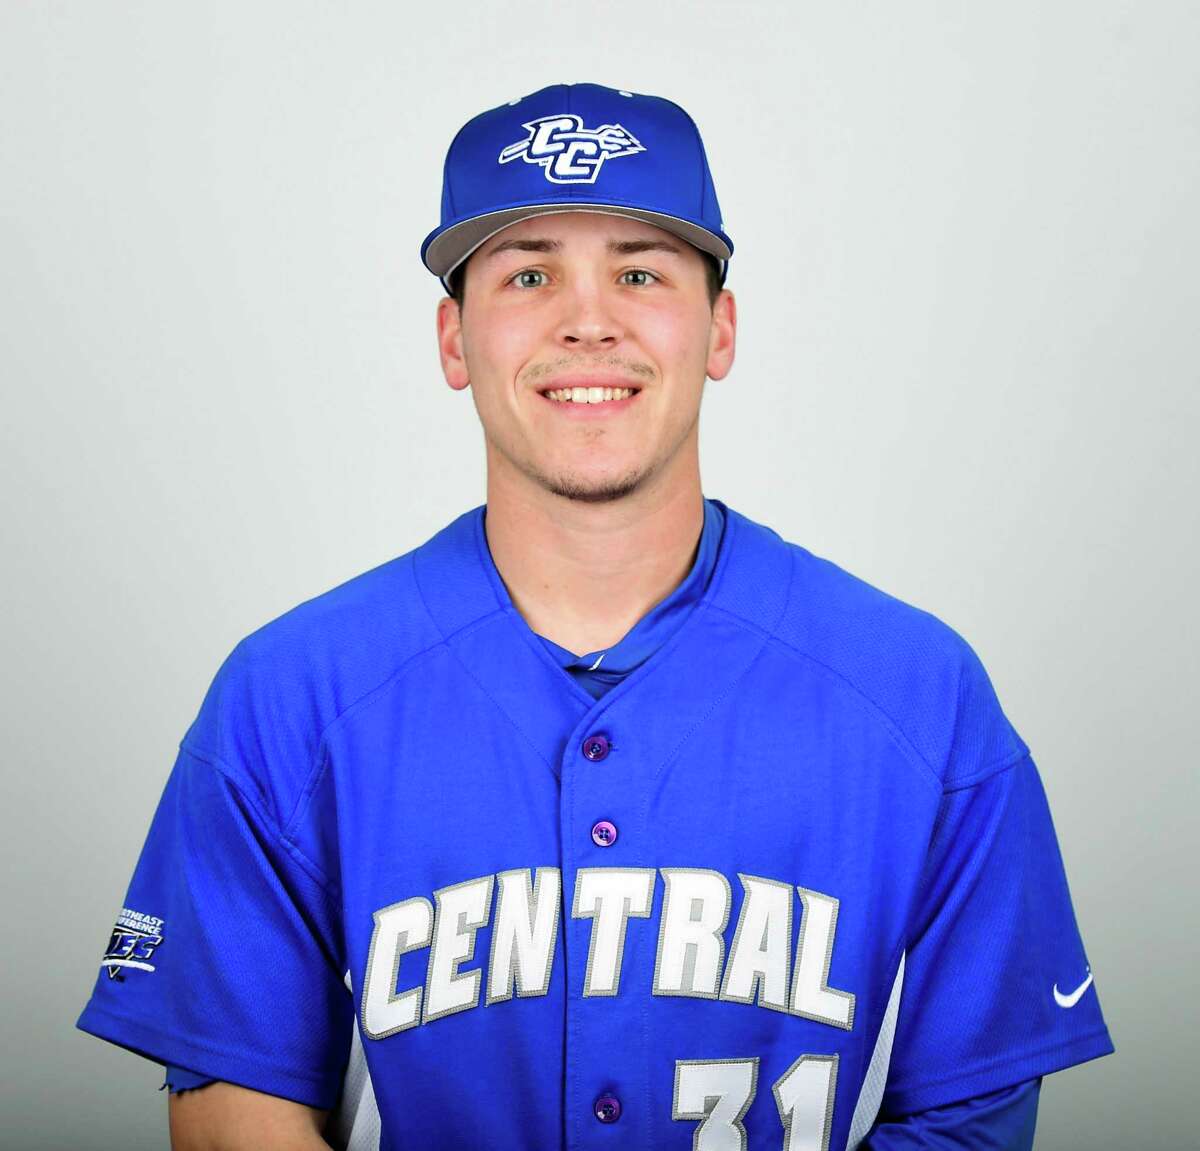 Central Connecticut State University's Dean Lockery, a New Haven native and Fairfield Prep graduate, was drafted by the Pittsburgh Pirates in the 32nd round.